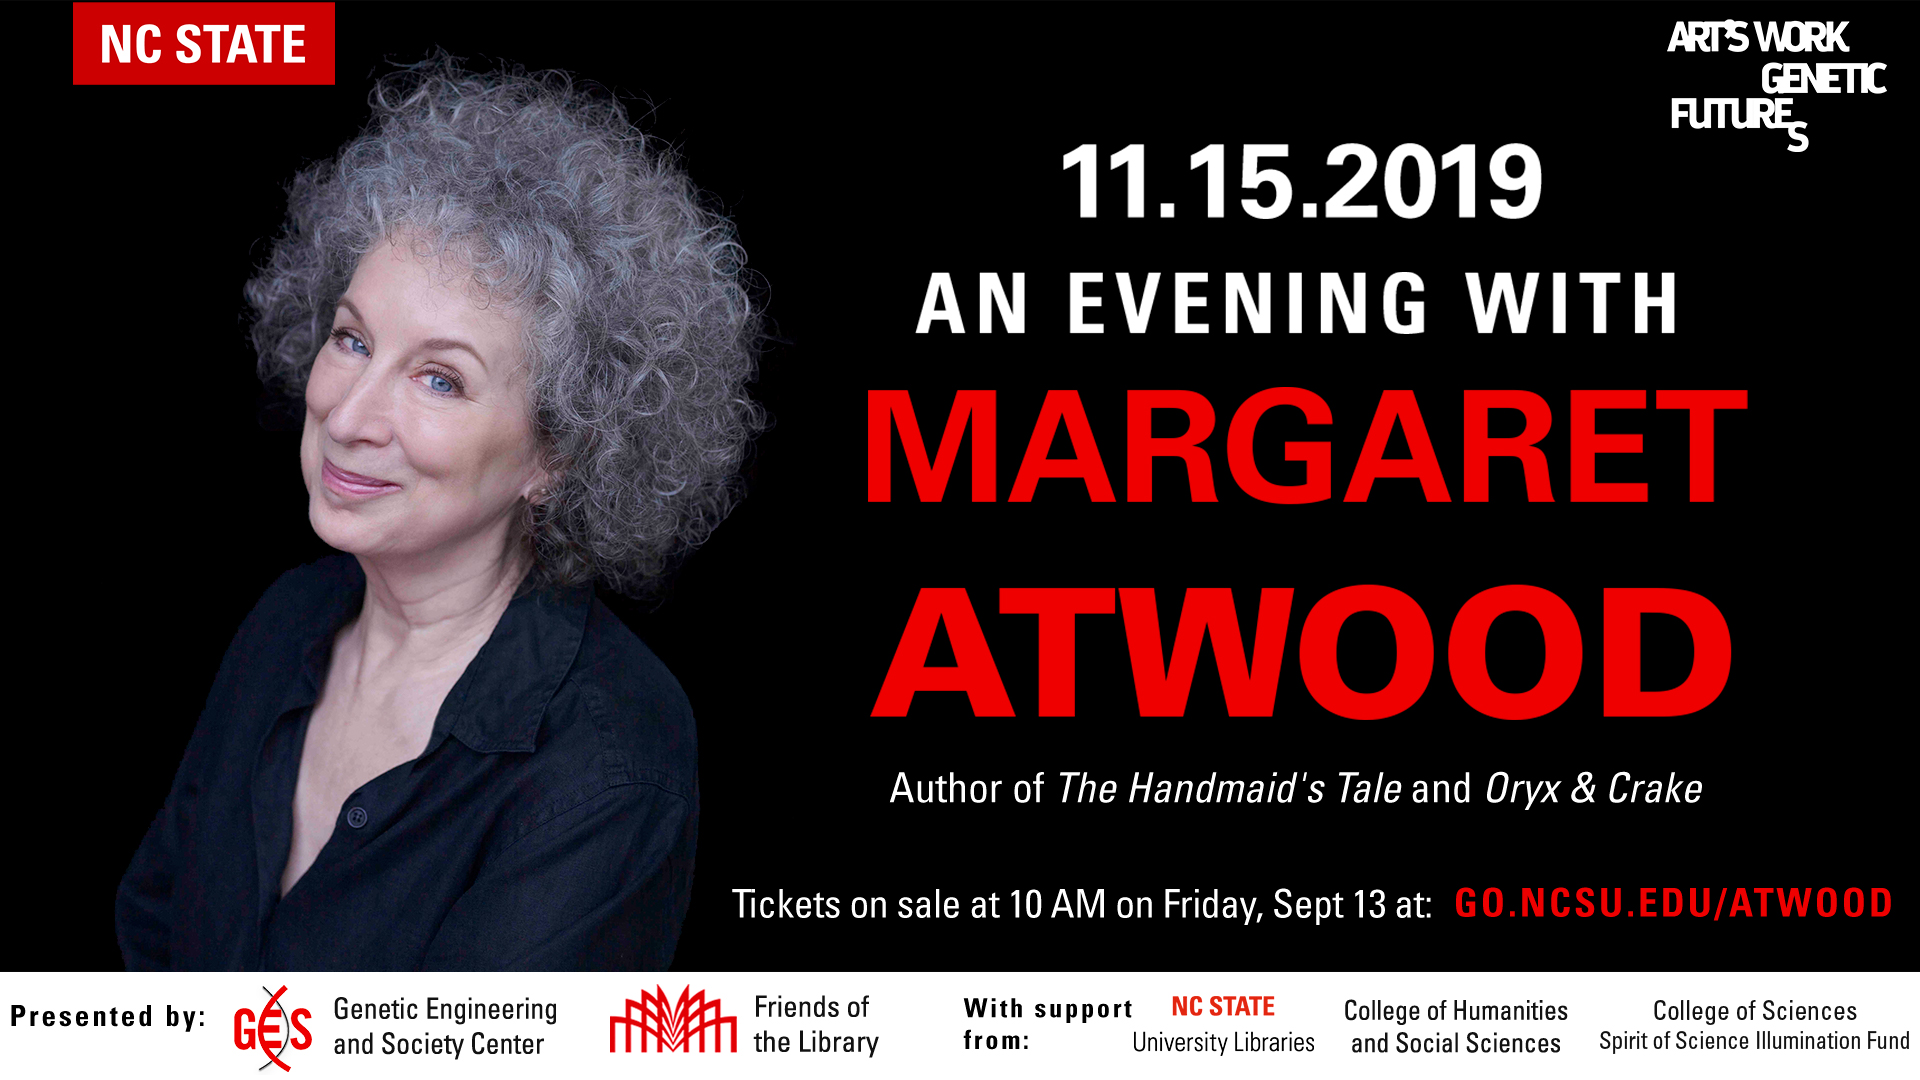 Photo of Margaret Atwood. 11.15.2019 - An Evening with Margaret Atwood. Presented by the GES Center and Friends of the Library. Learn more at go.ncsu.edu/atwood